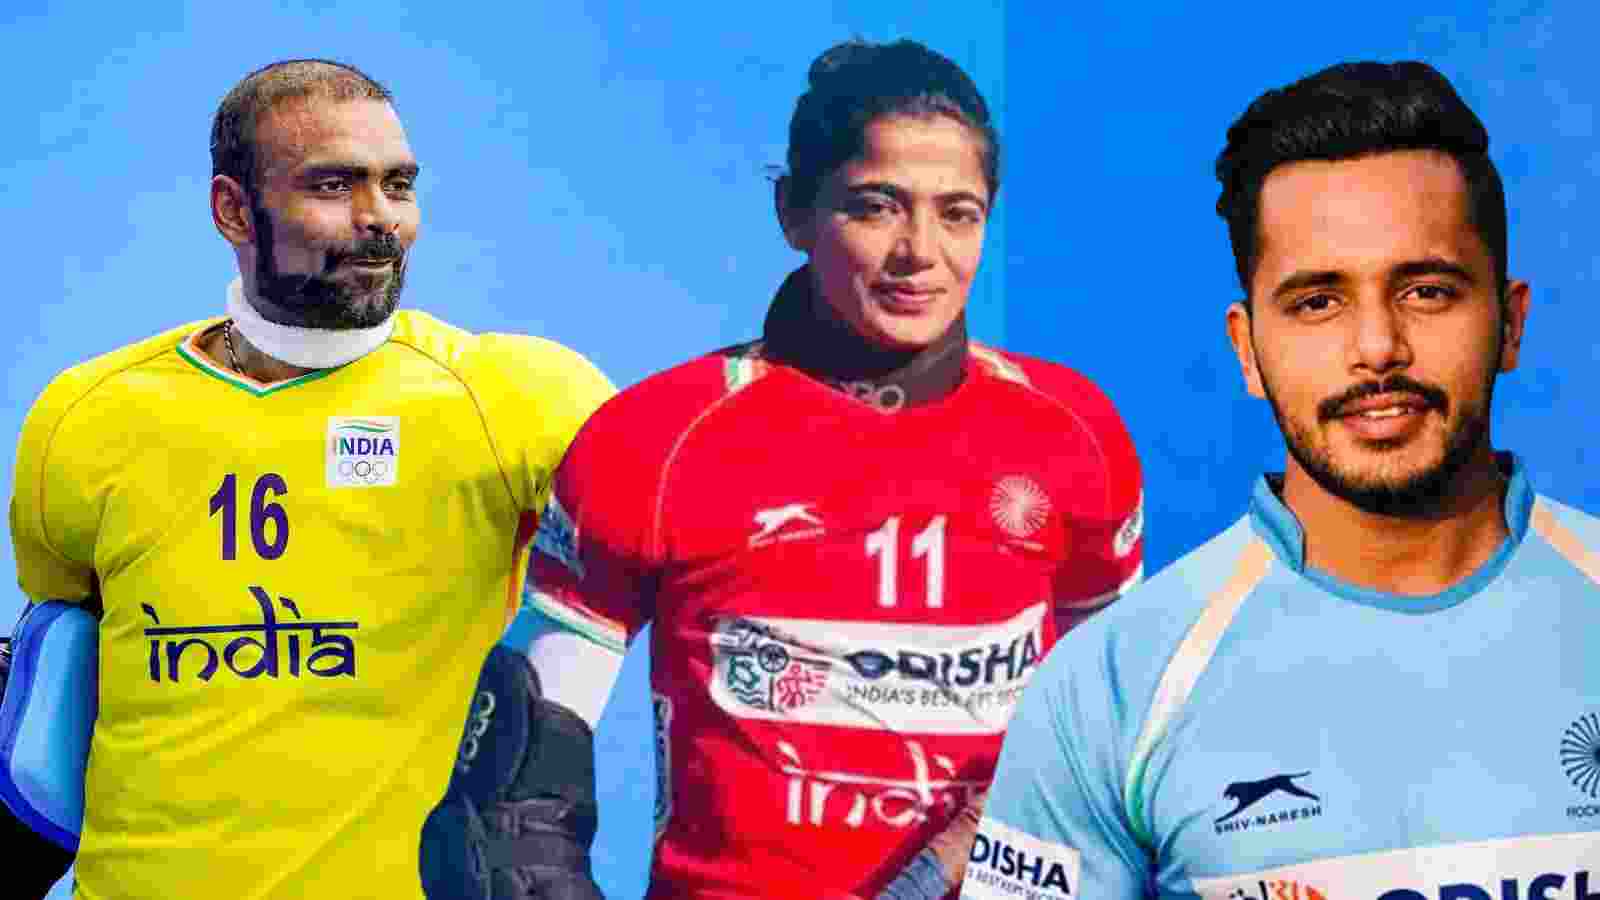 Veteran goalkeepers P R Sreejesh and Savita Punia along with captain and defender Harmanpreet Singh found themselves in contention for the 'Player of the Year' honours